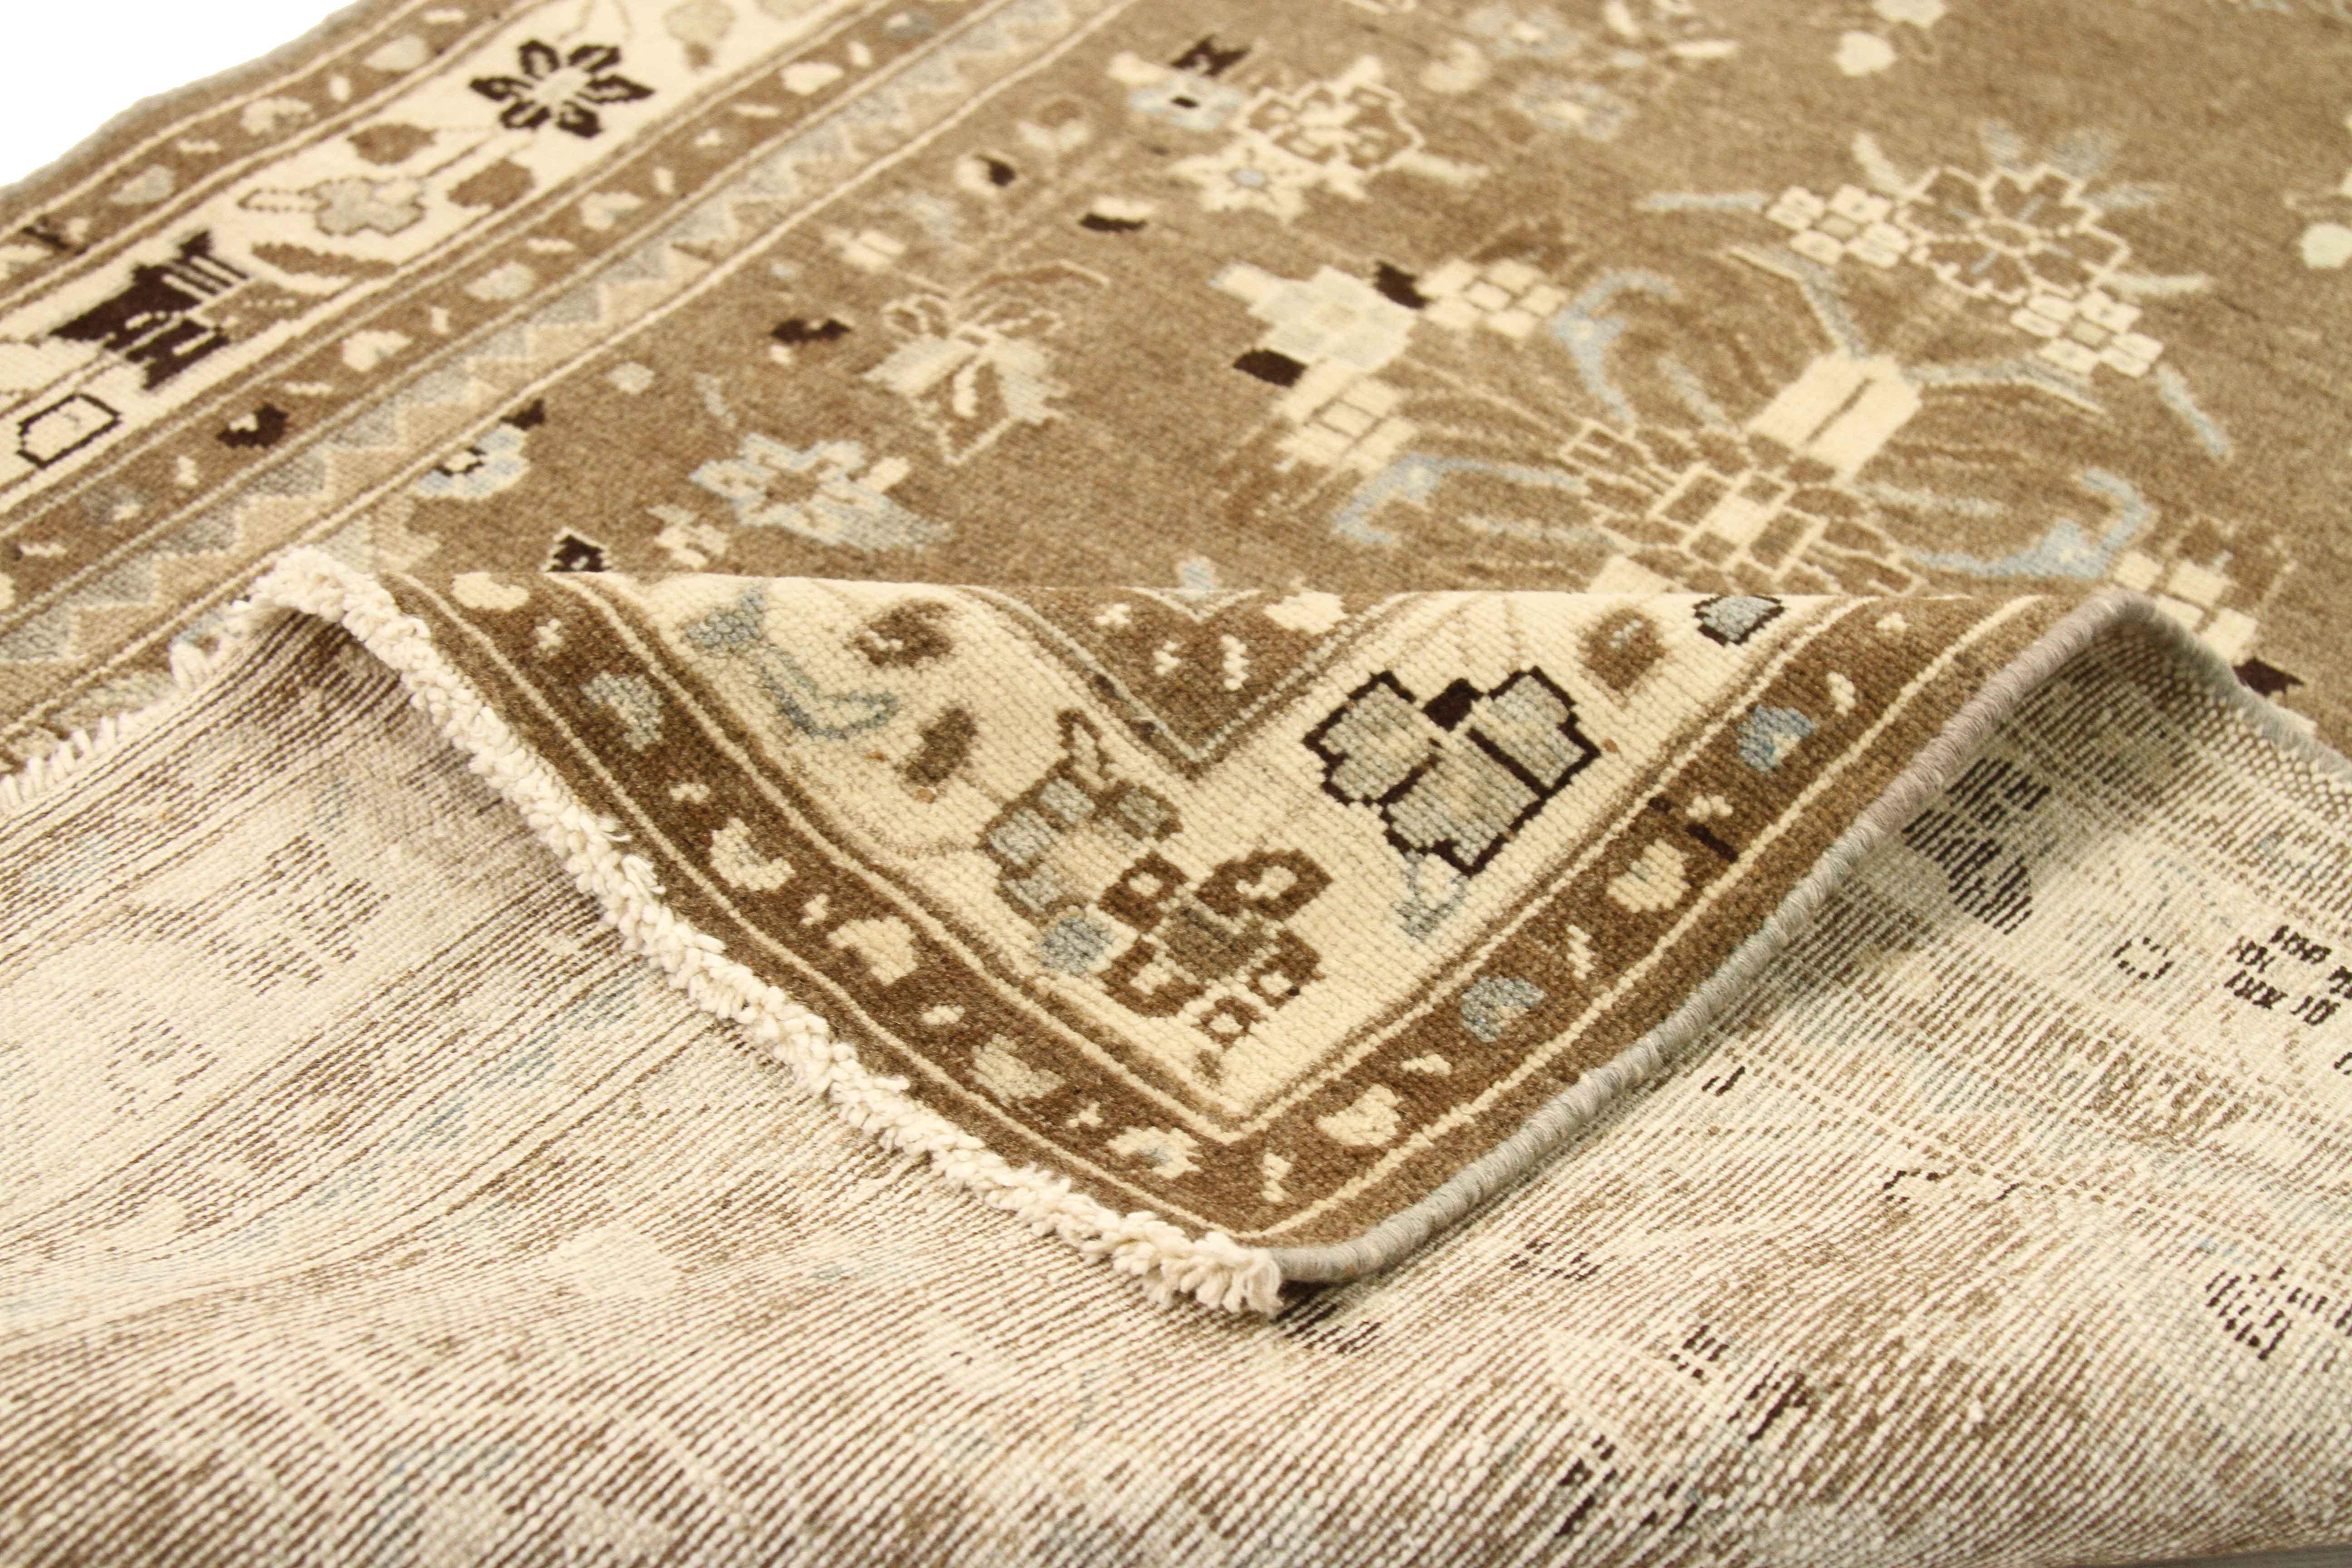 Hand-Woven Antique Persian Malayer Runner Rug with Black and Ivory Floral Patterns For Sale